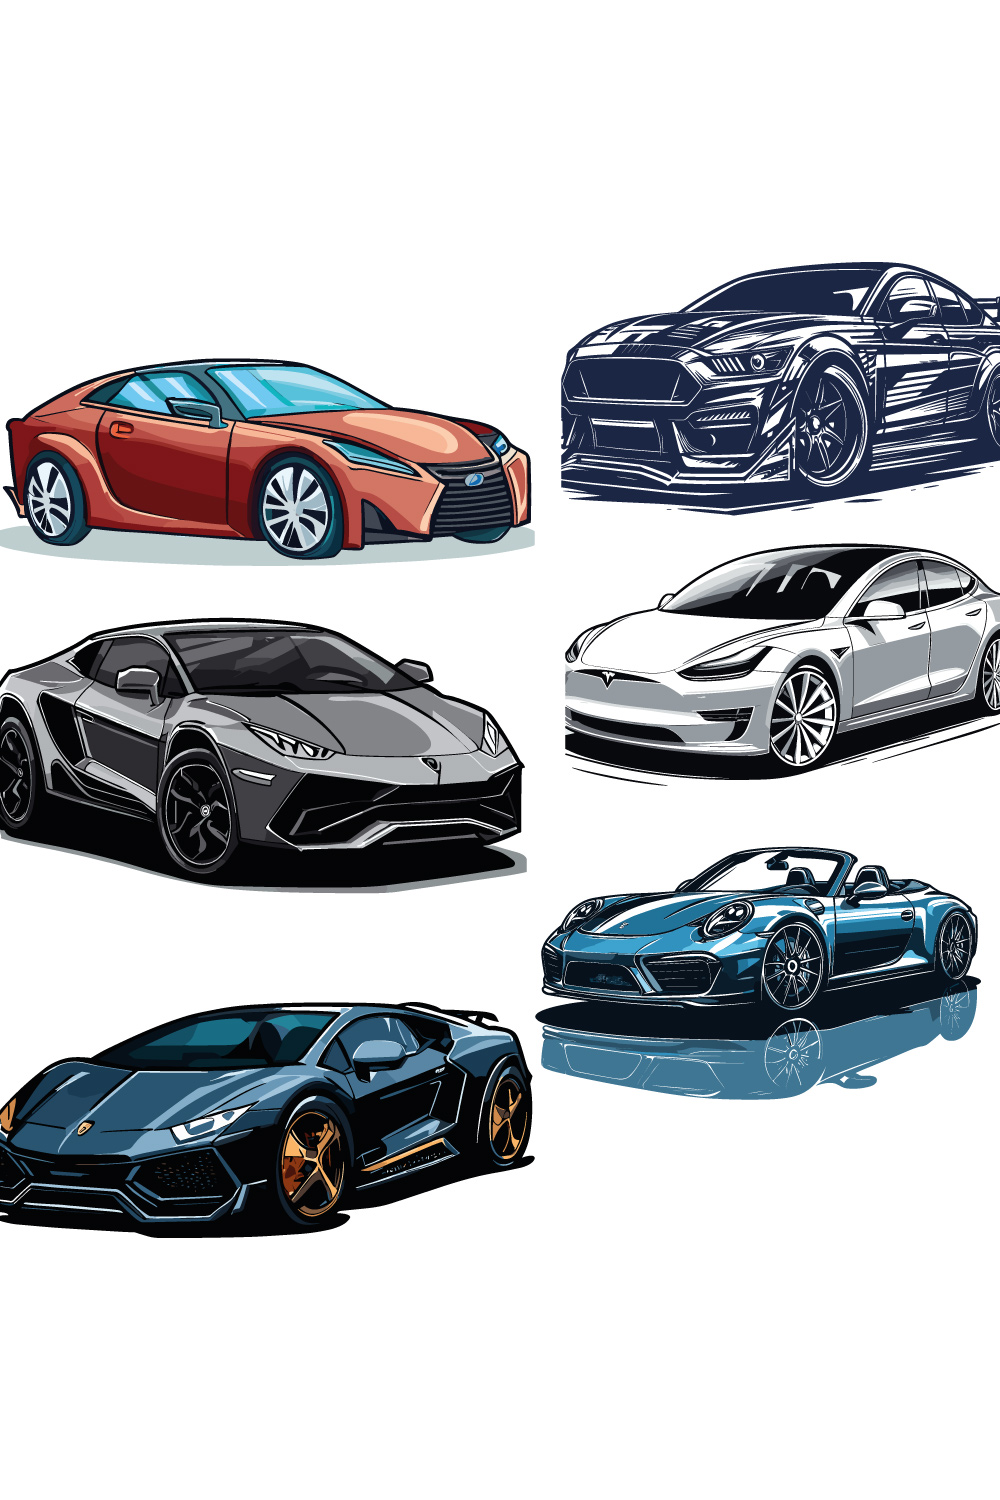 Sports cars for competition Transport for fast driving in races pinterest preview image.